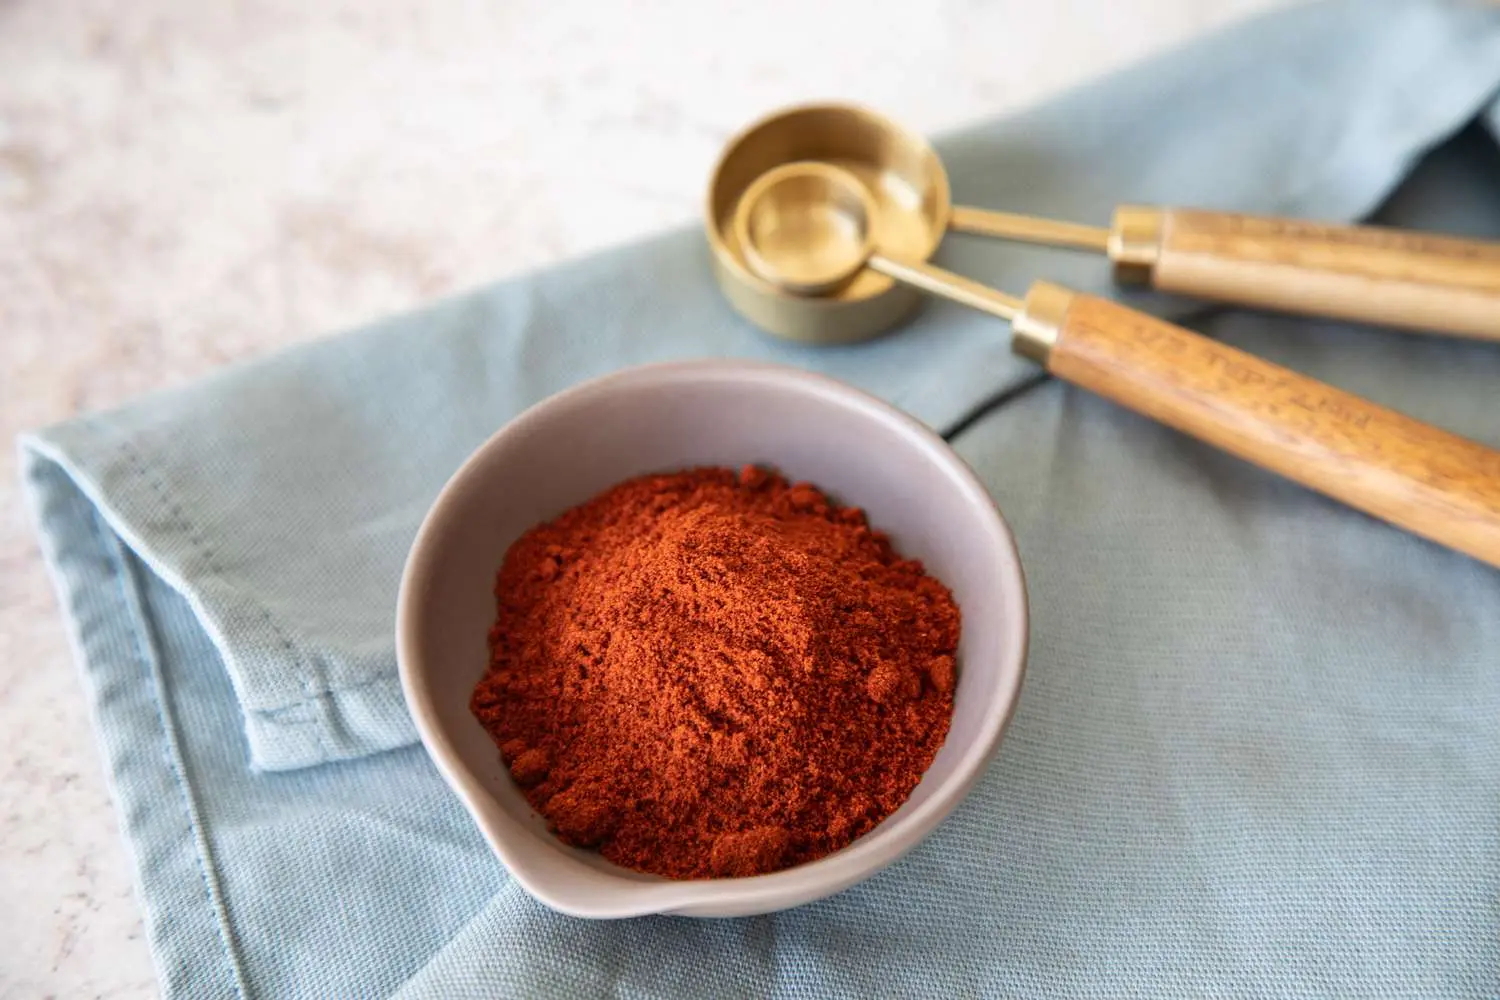 how long does smoked paprika last - Does smoked paprika expire